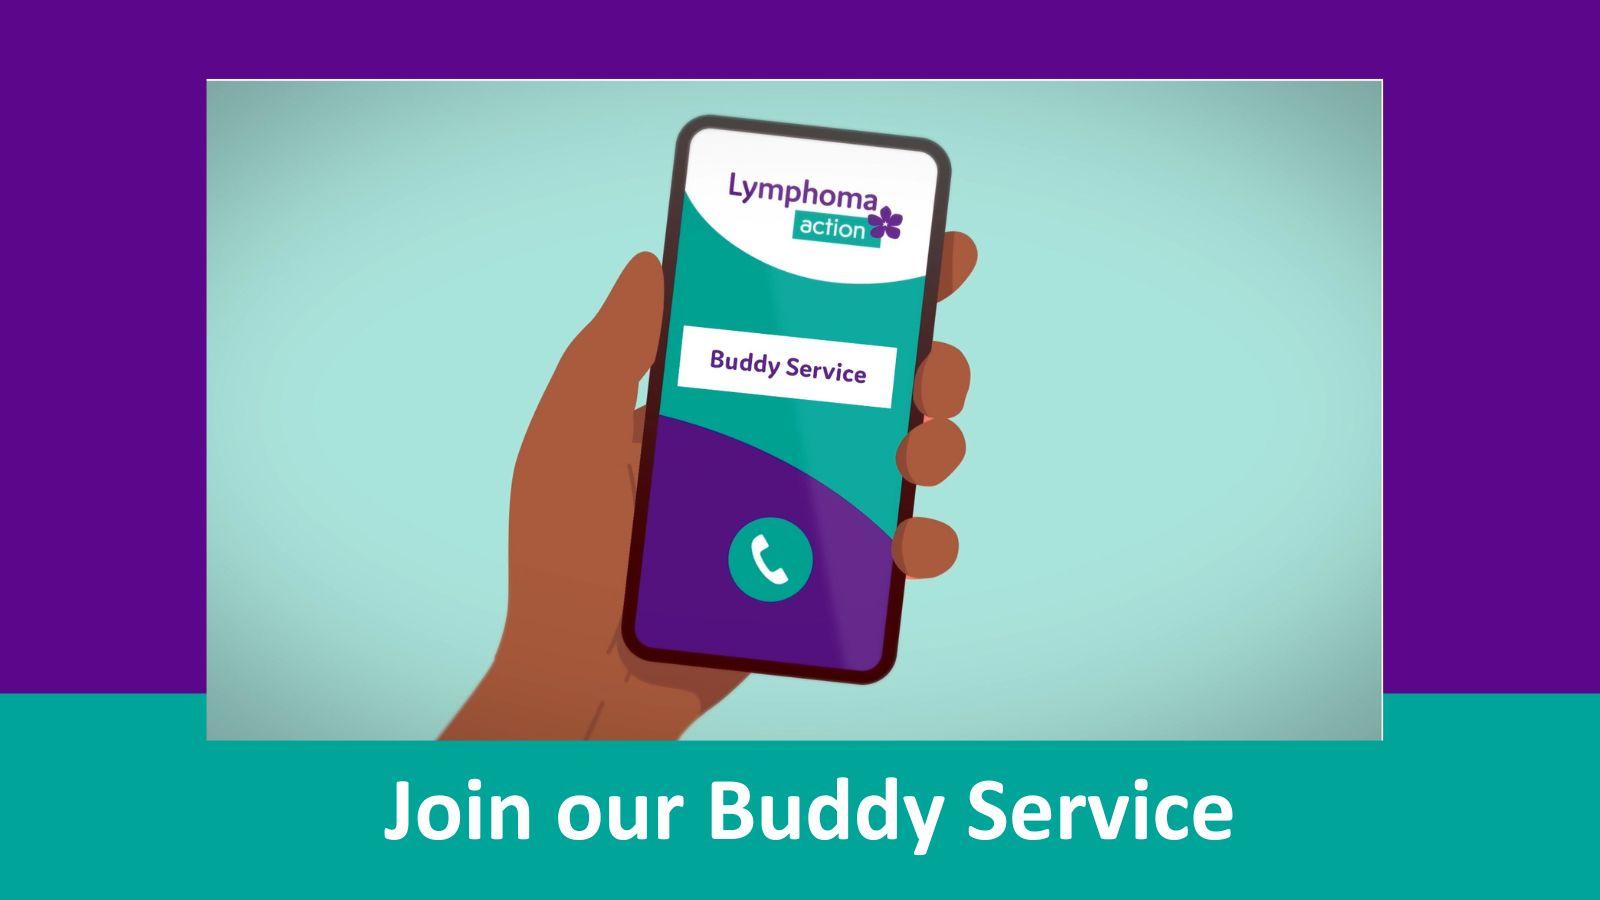 A cartoon image of a person's hand holding a mobile phone. The phone screen says Lymphoma Action Buddy Service. Below the image are the words Join our Buddy Service